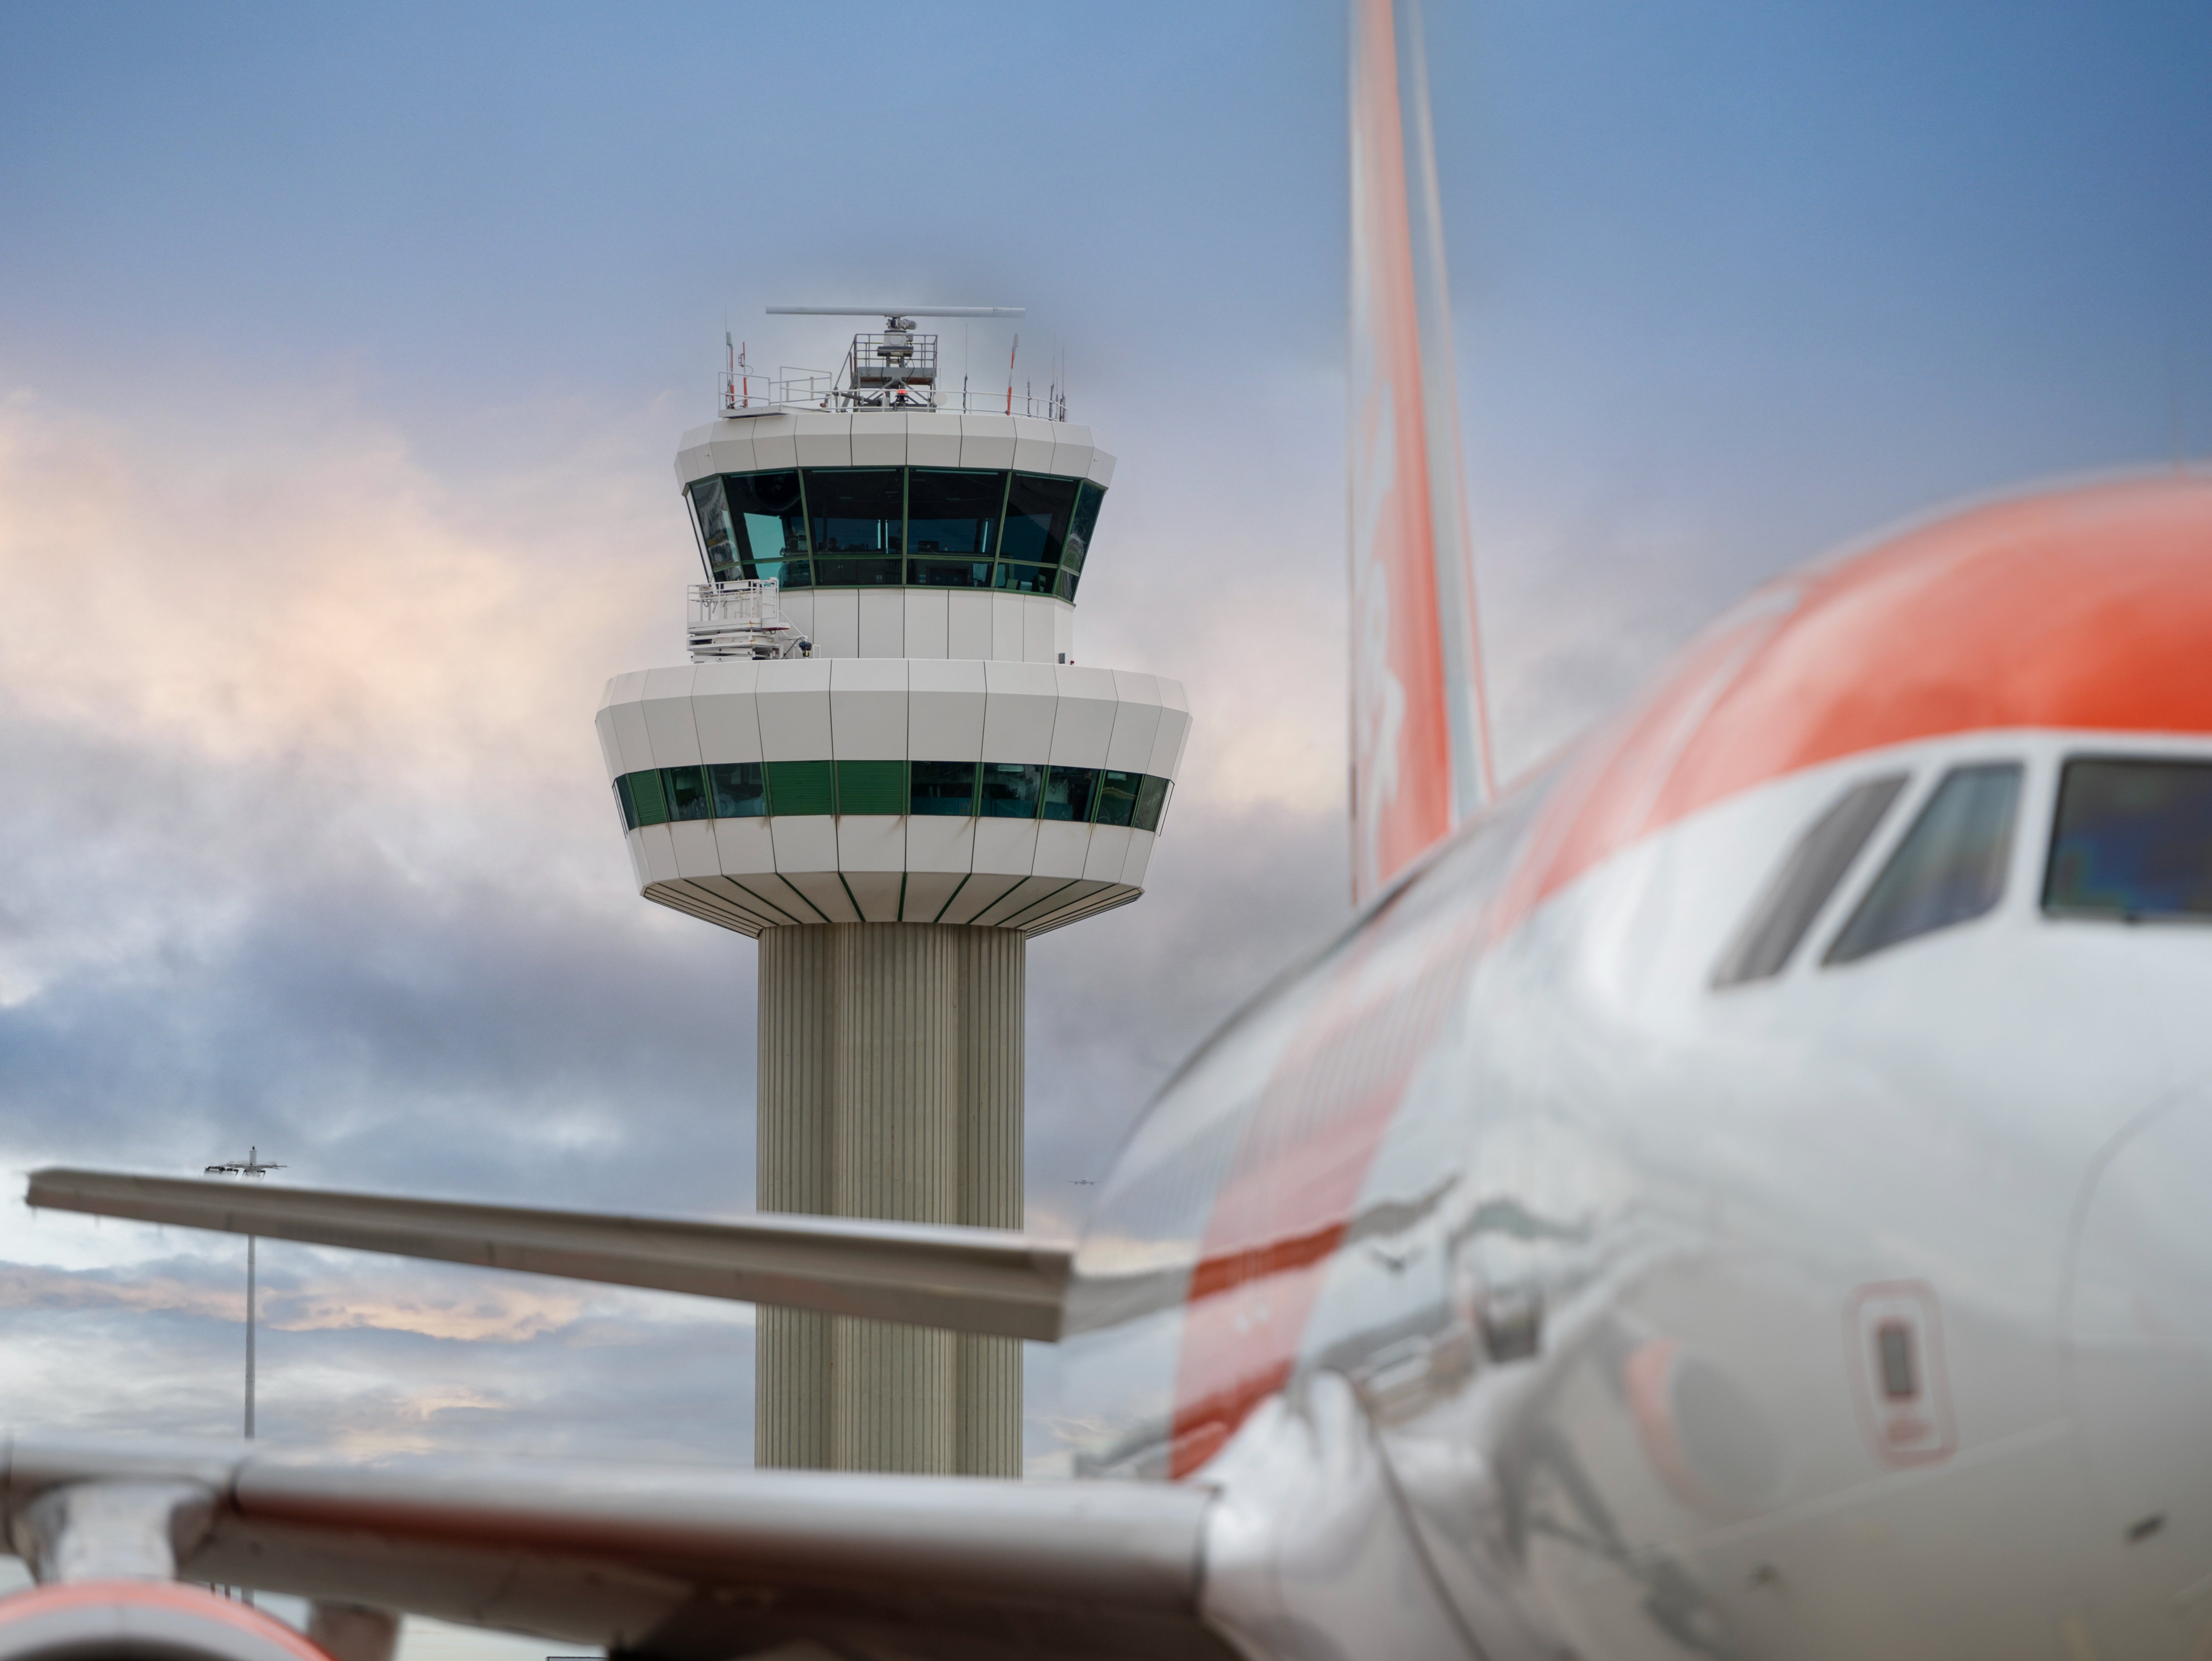 In control? An easyJet Airbus passes Gatwick airport control tower